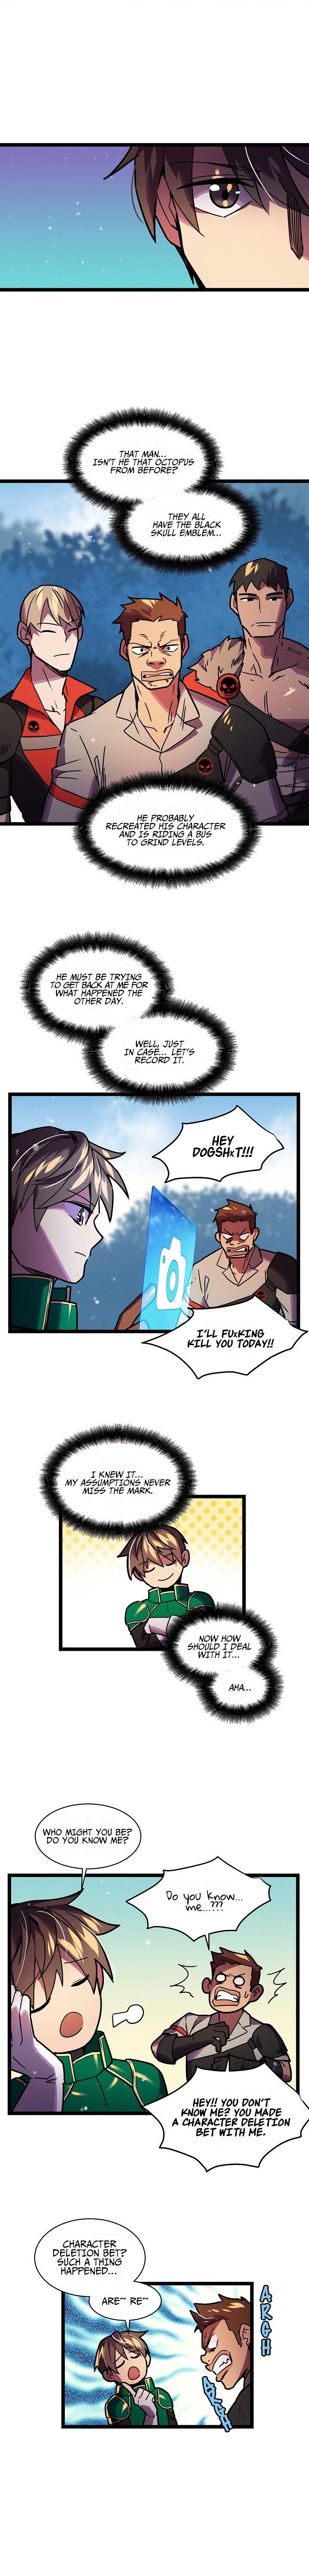 Ranker's Return Chapter 22 page 5